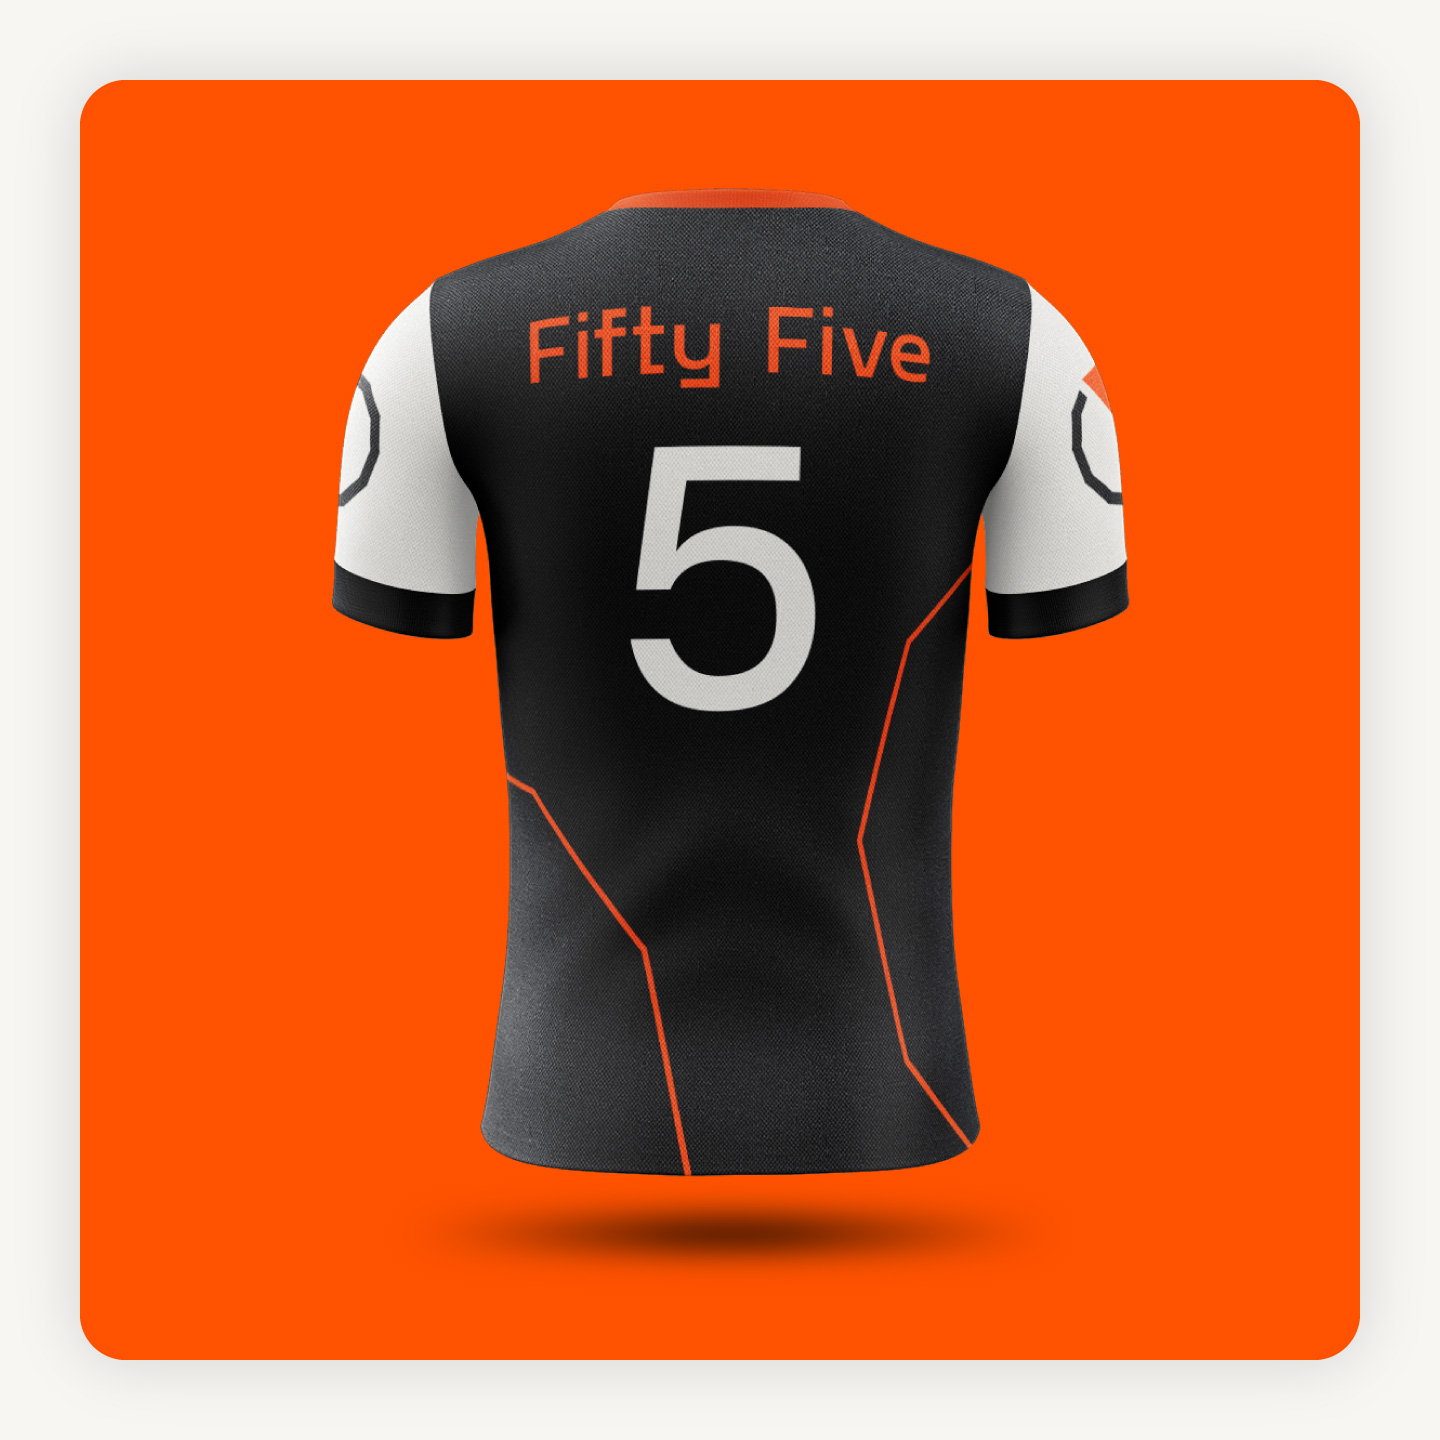 Fifty Five and Five football shirt to indicate the World Cup season.